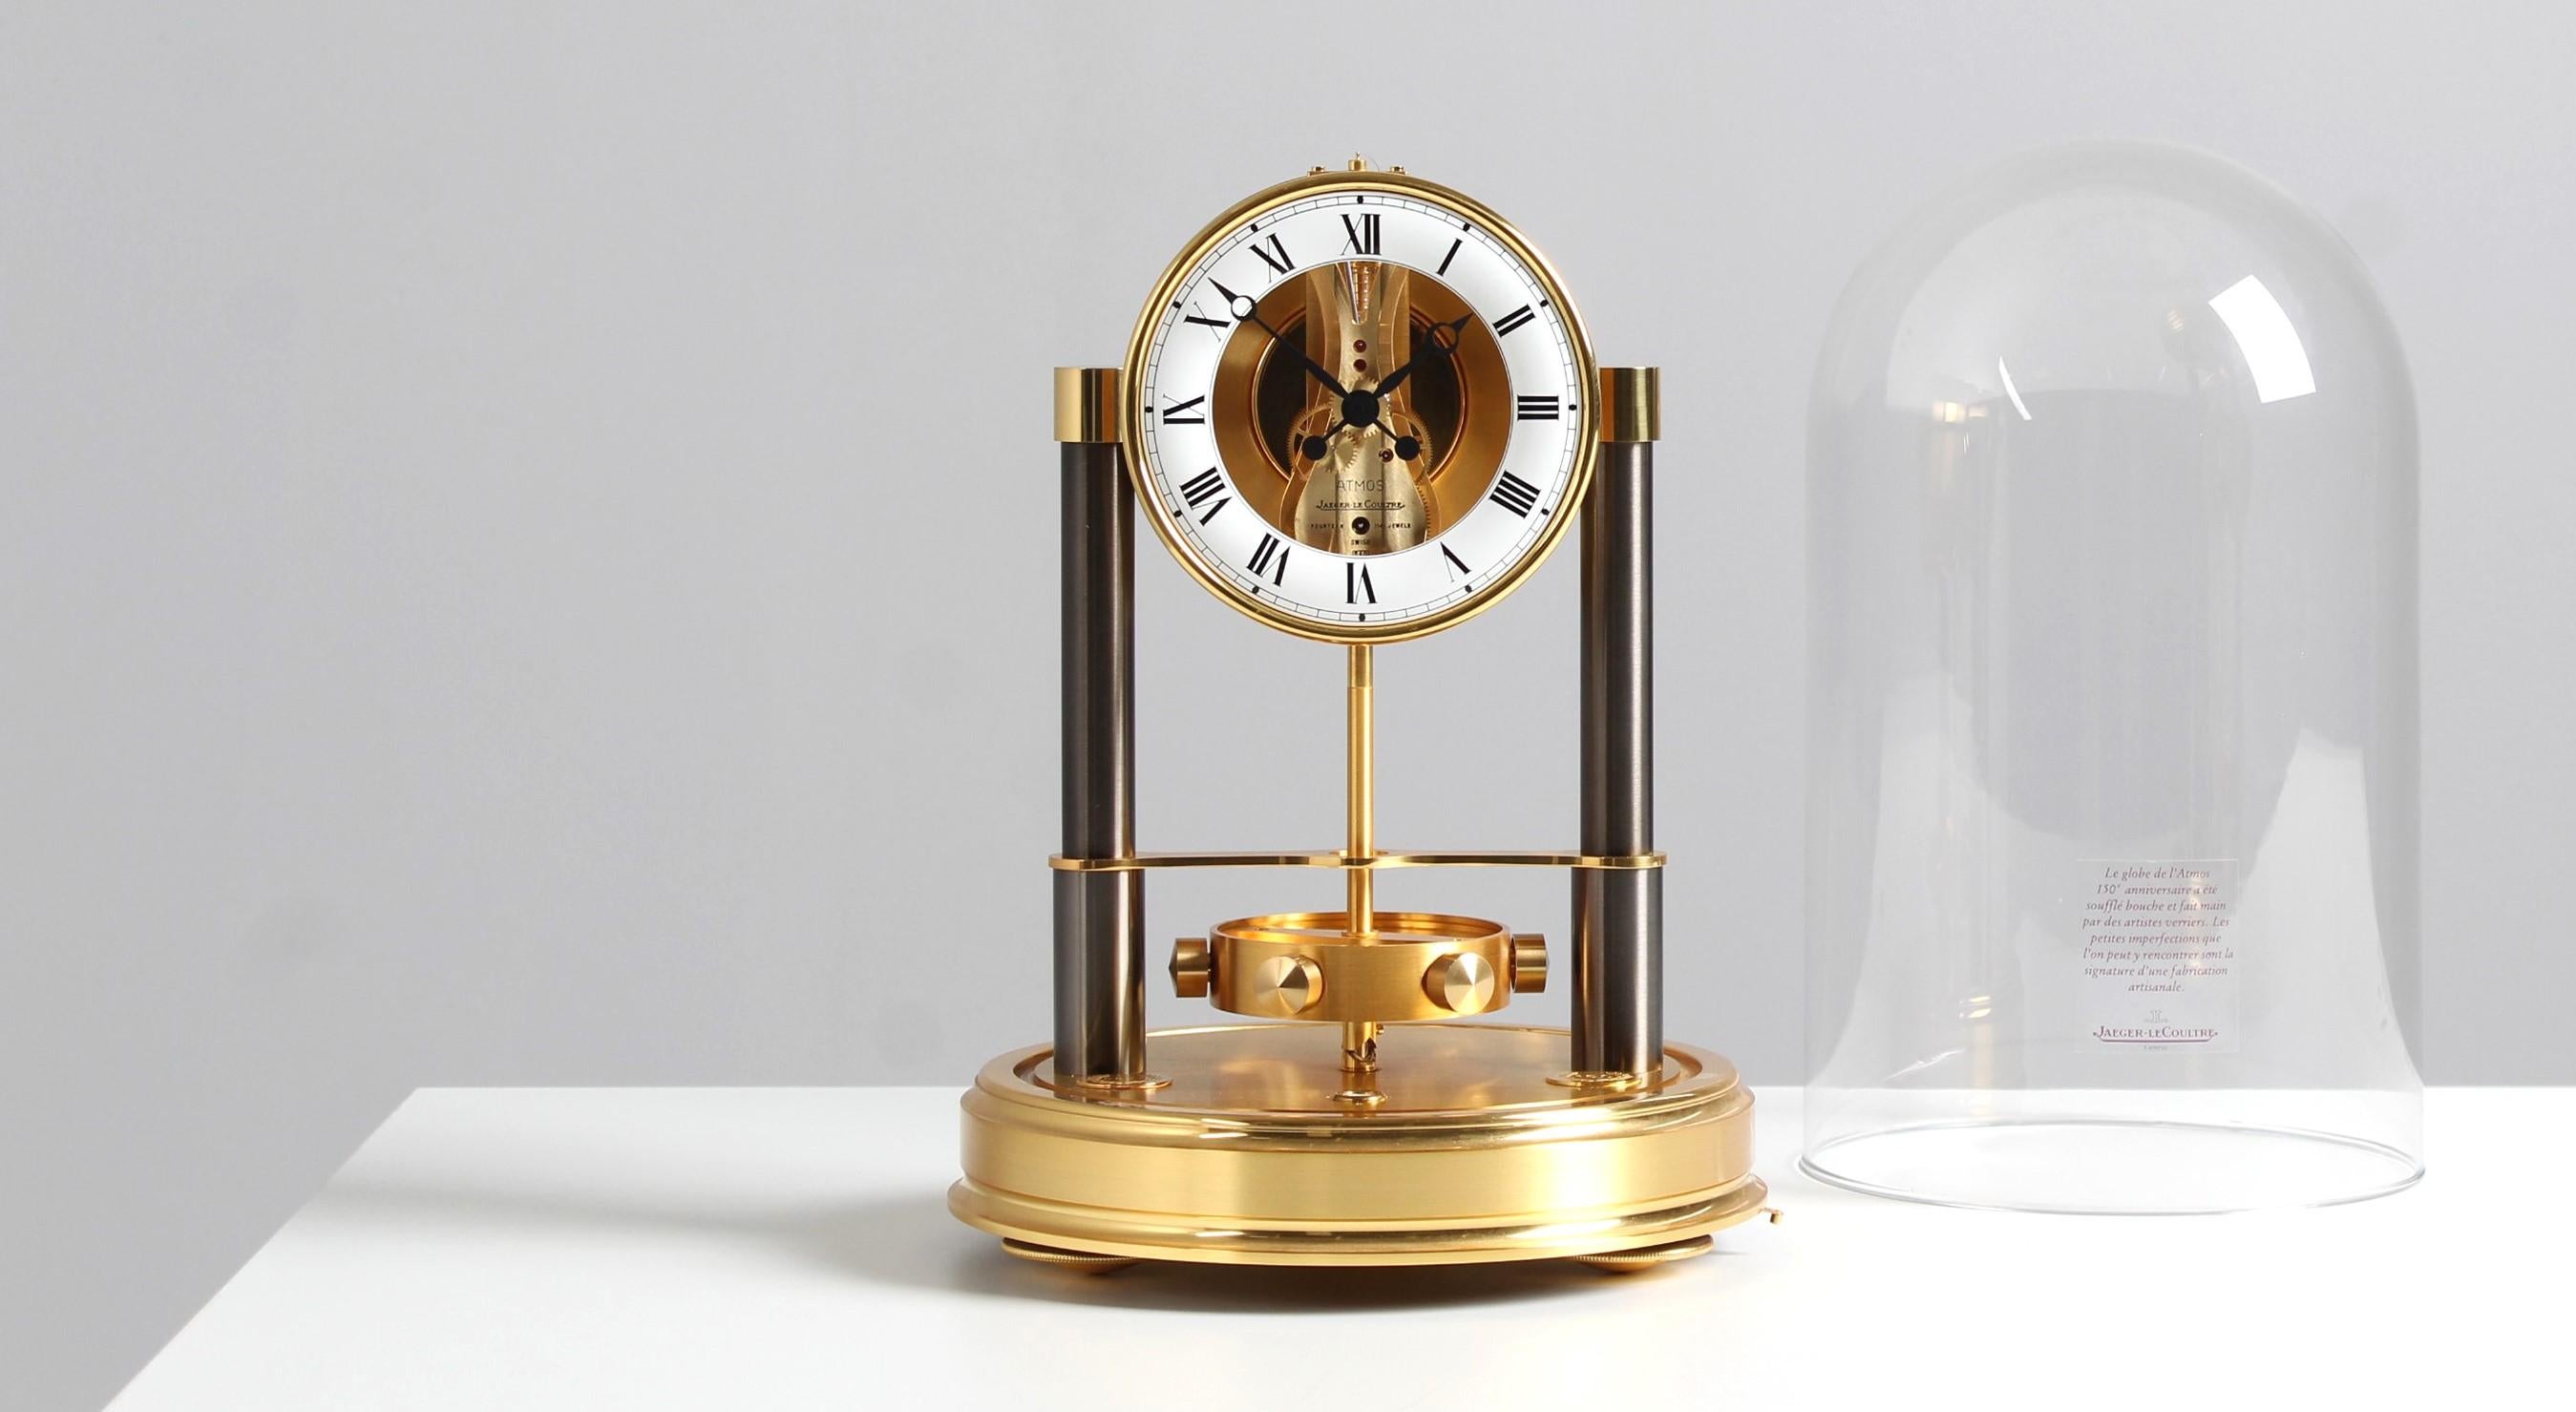 Jaeger LeCoultre - Atmos 150th Anniversary in full set with box and papers

Switzerland
brass, glass, enamel
Year of manufacture 1983

Dimensions: H x D: 34 x 22 cm

Description:
Fine and rare Atmos clock made for the 150th anniversary of the